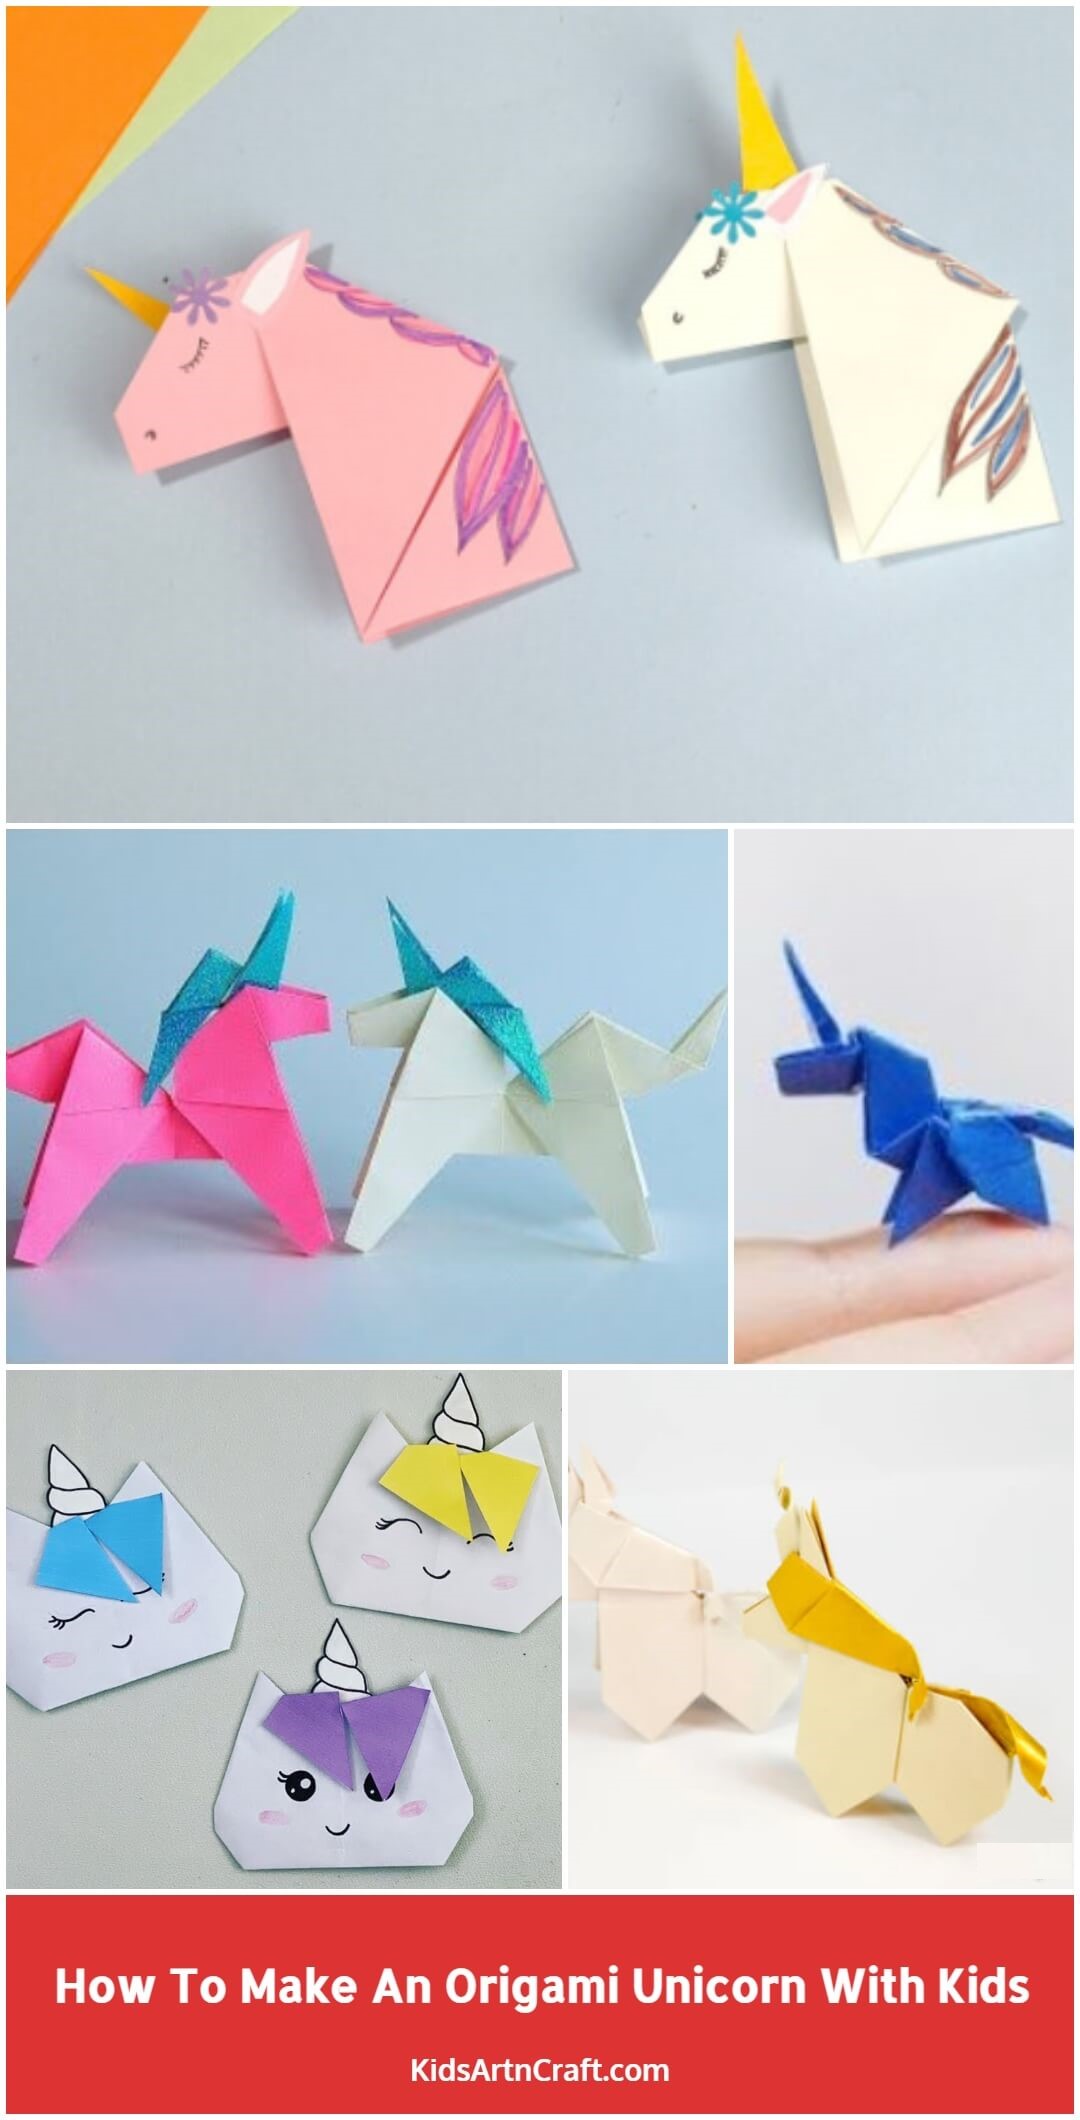 How To Make An Origami Unicorn With Kids